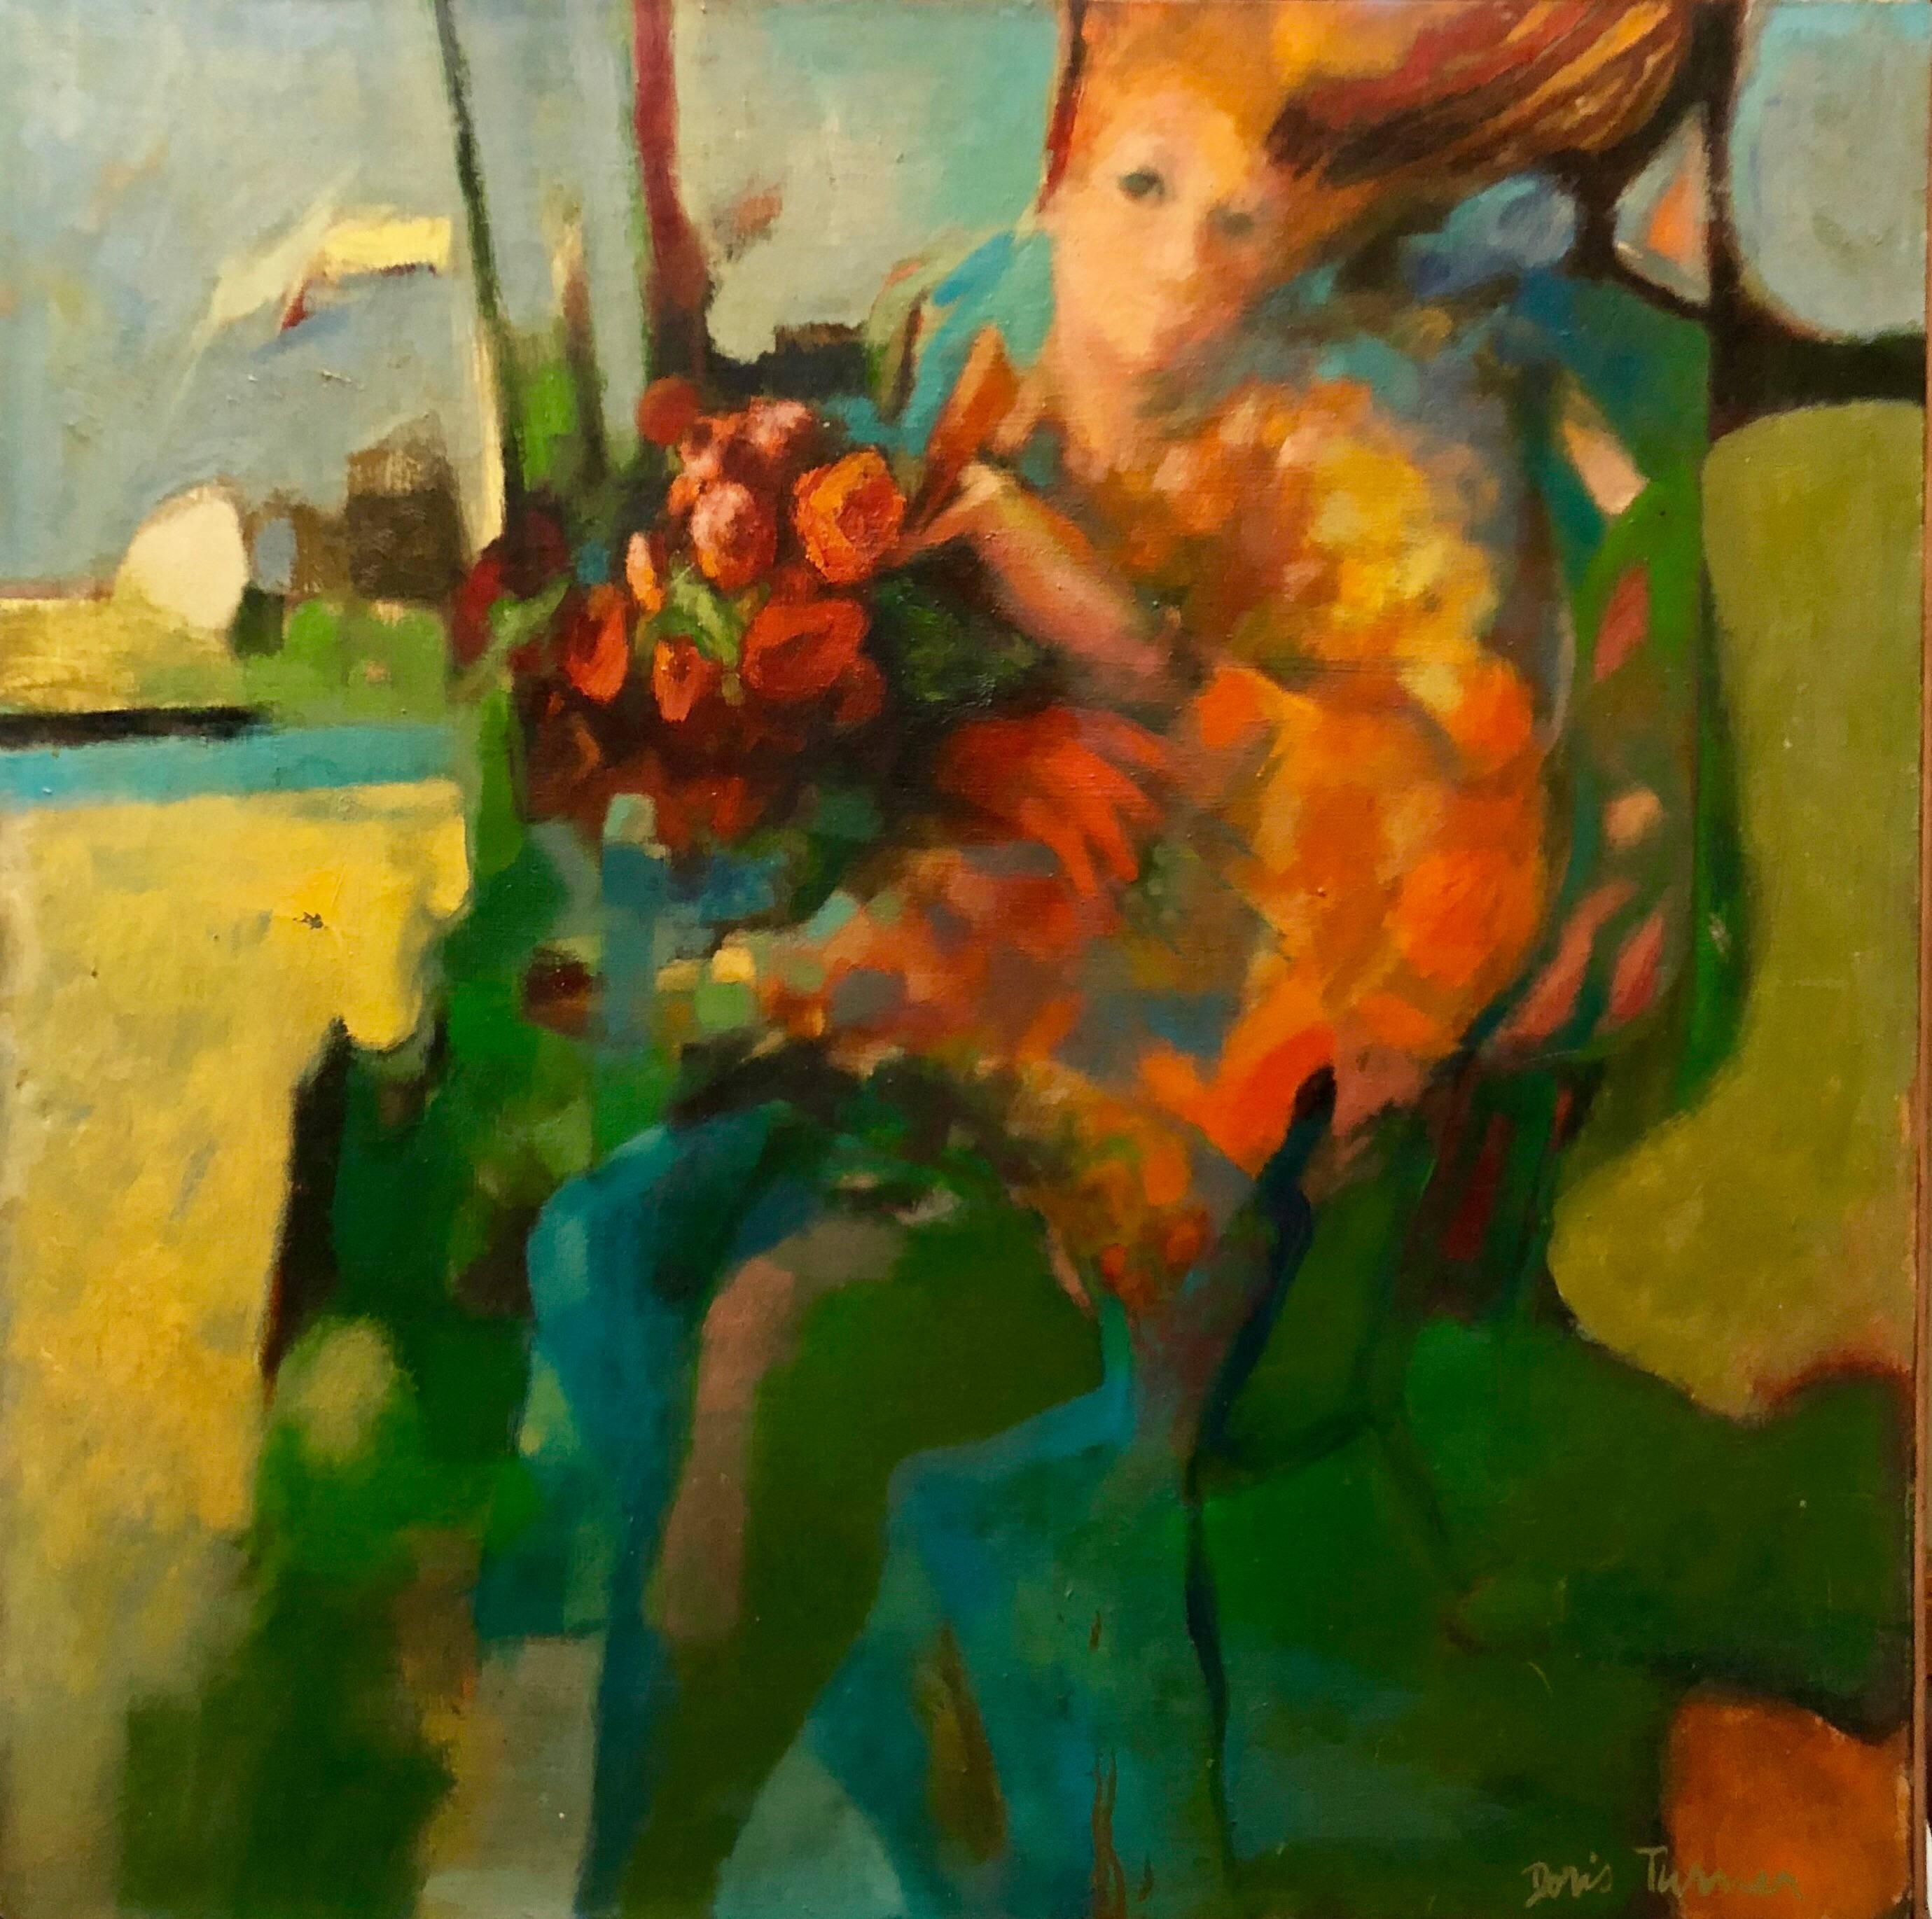 Doris Turner Figurative Painting - Autumn Wind, Large American Modernist Oil Painting Woman with Flowers